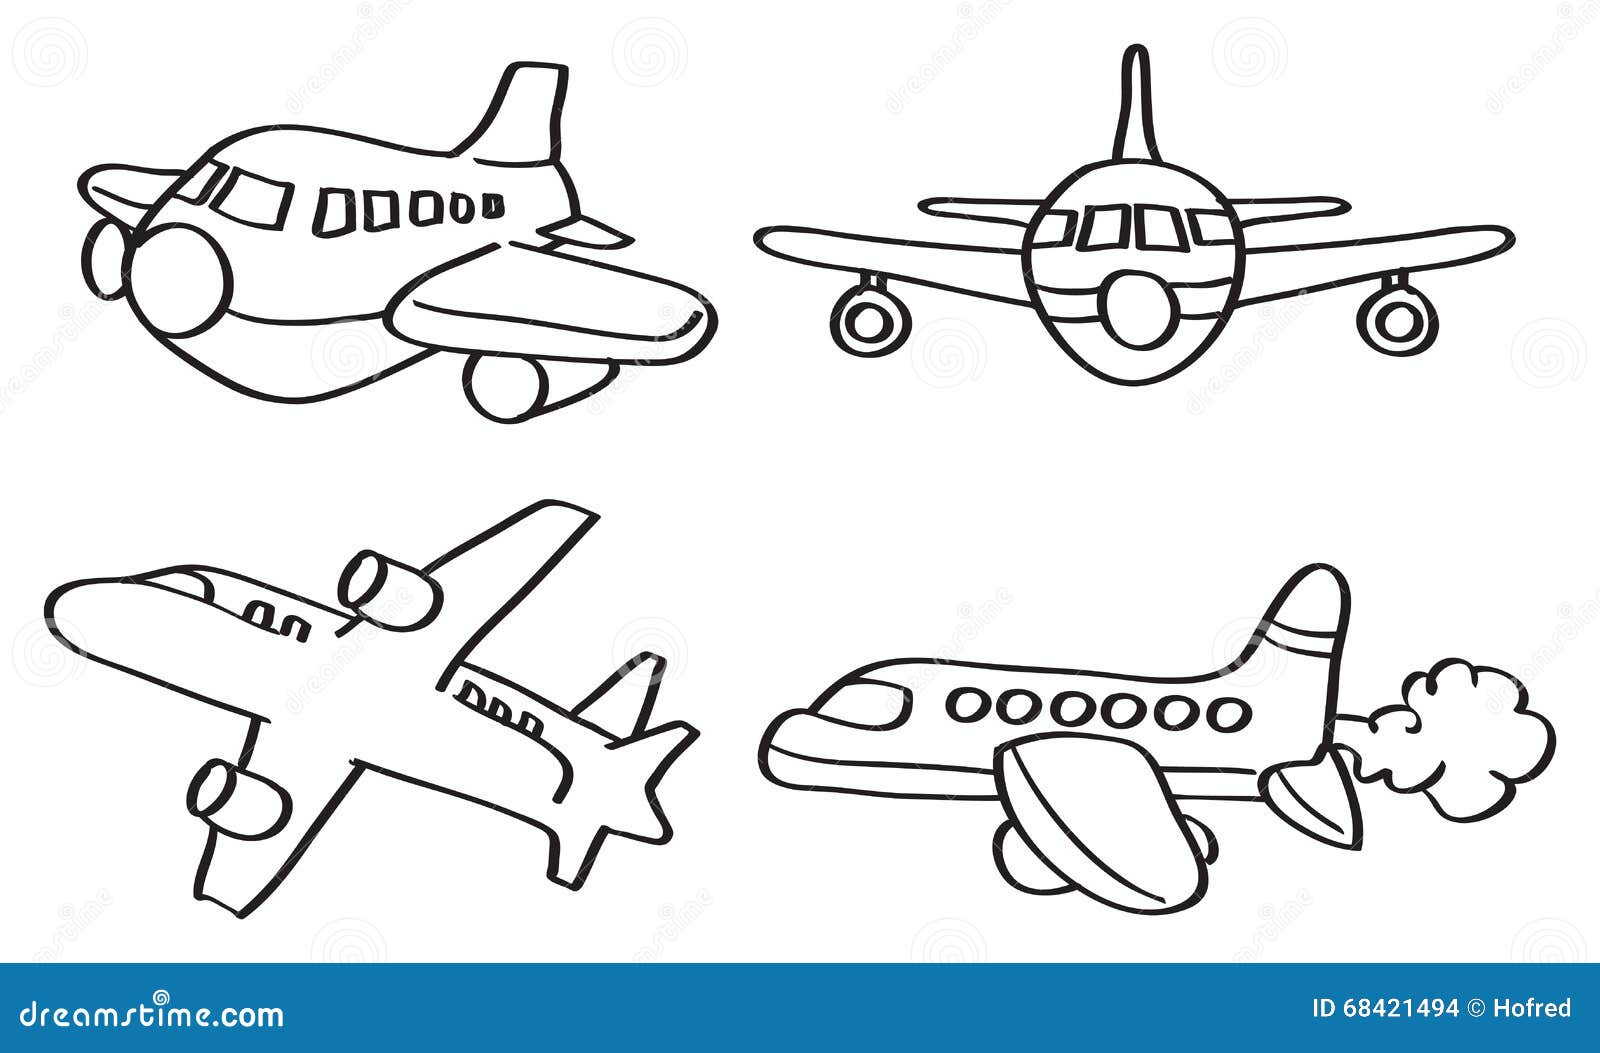 100000 Airplane drawing Vector Images  Depositphotos